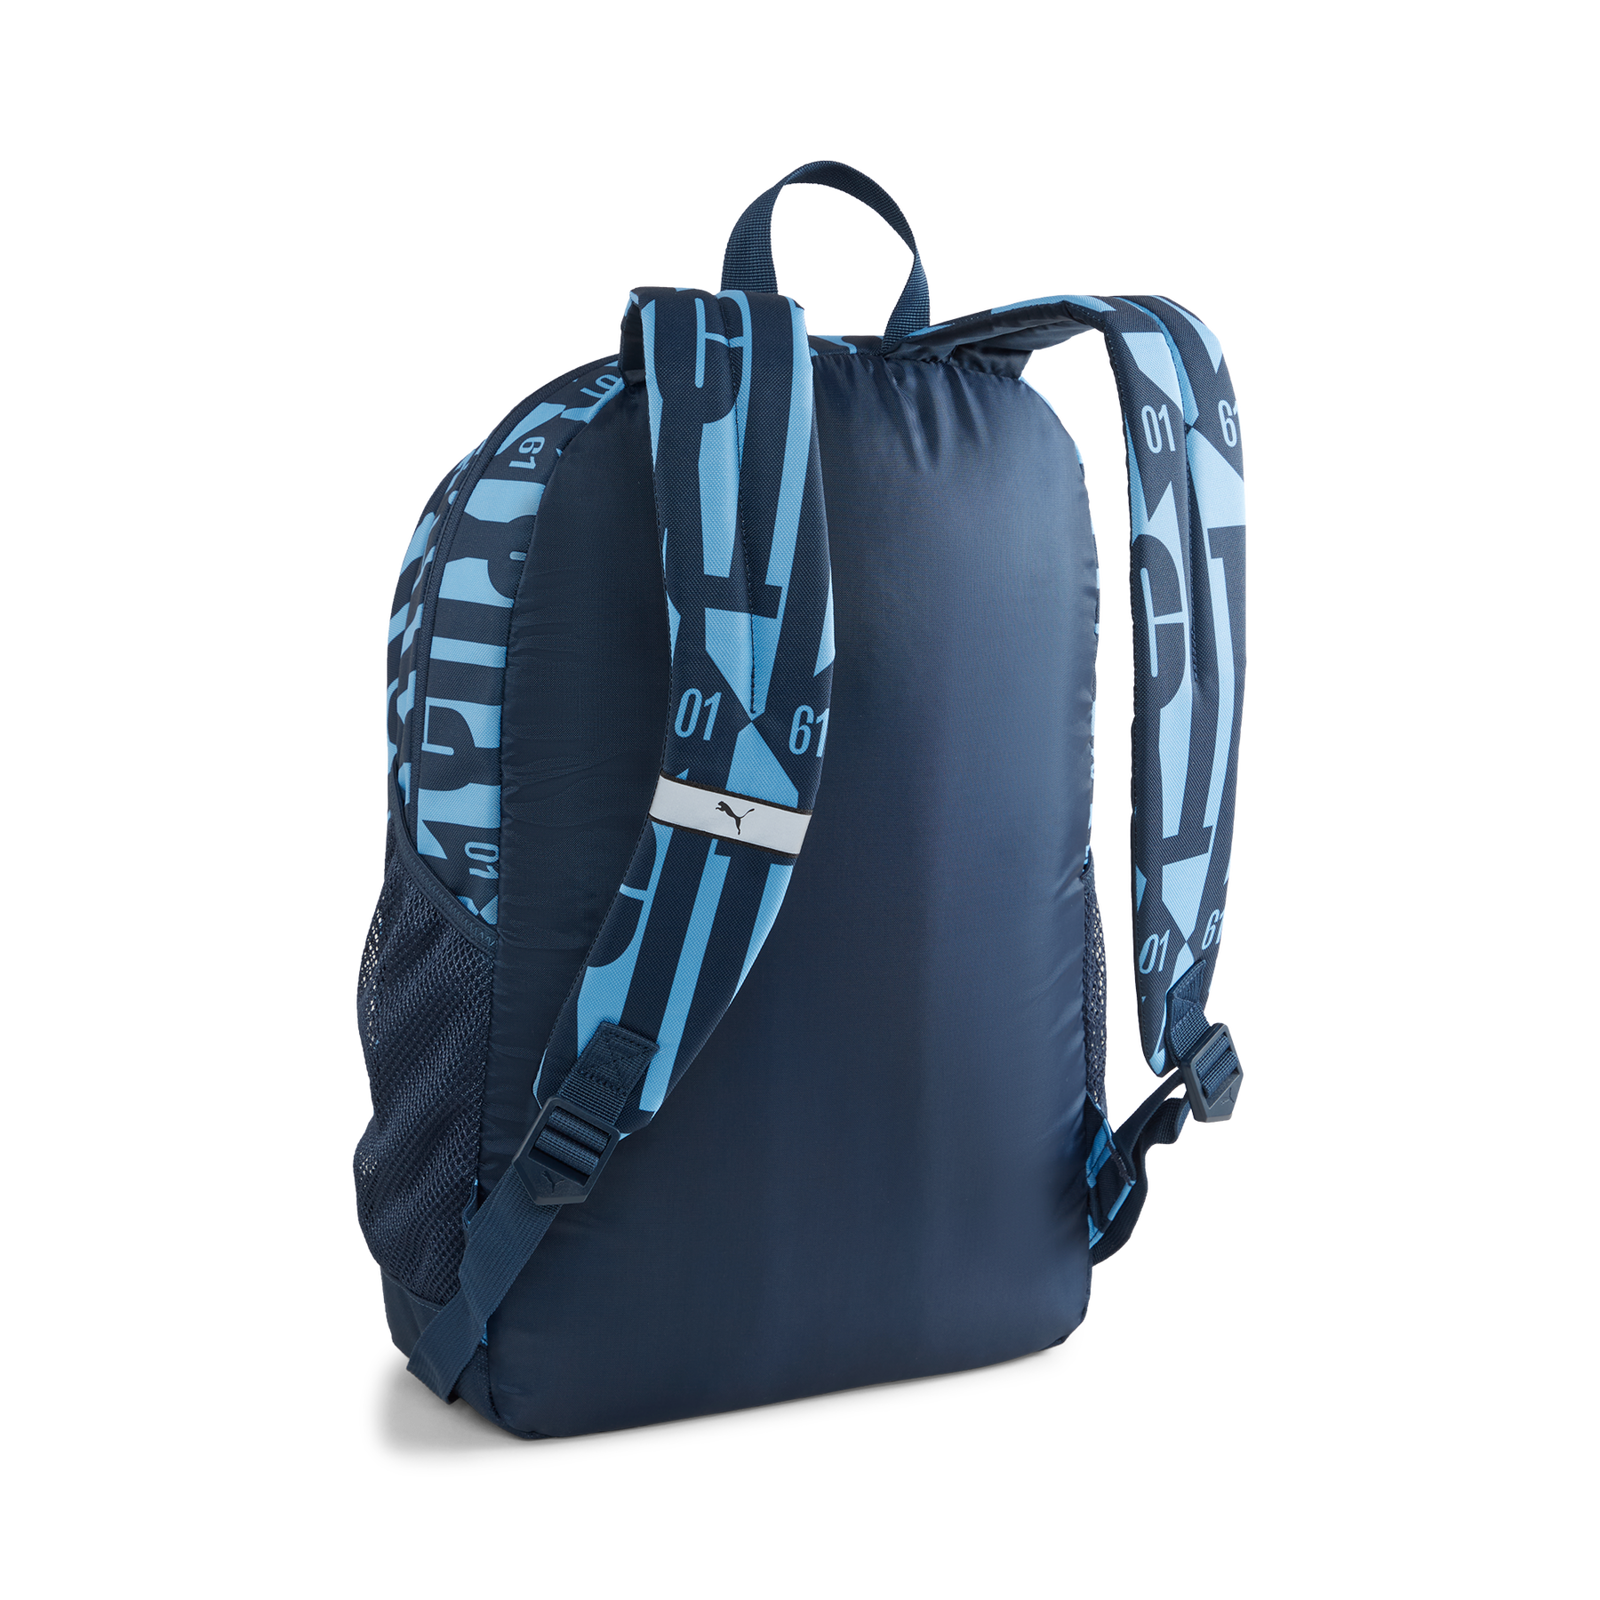 Manchester City Ftblculture+ Backpack | Official Man City Store